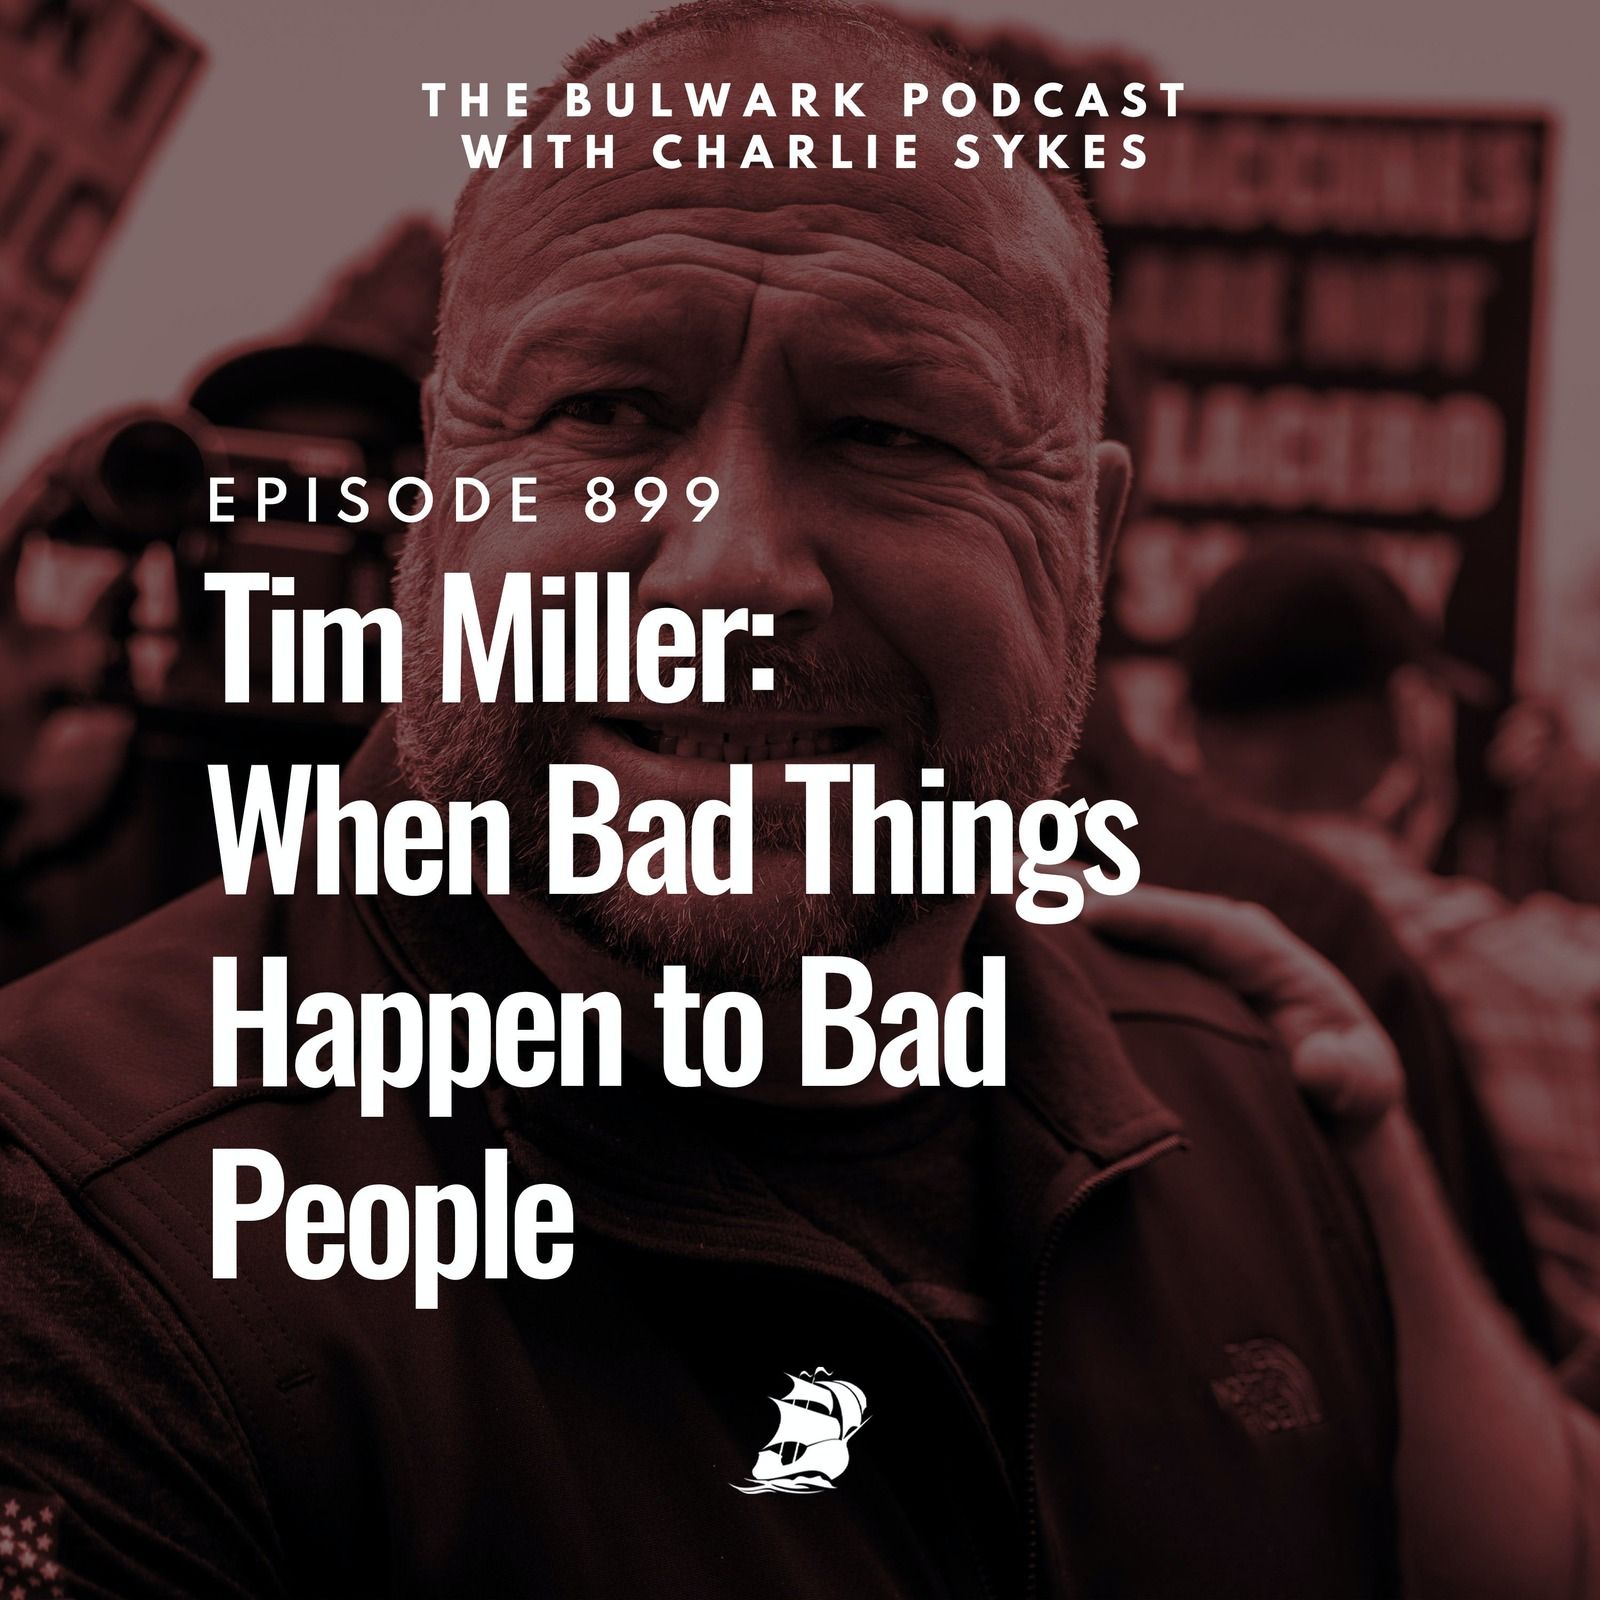 Tim Miller: When Bad Things Happen to Bad People